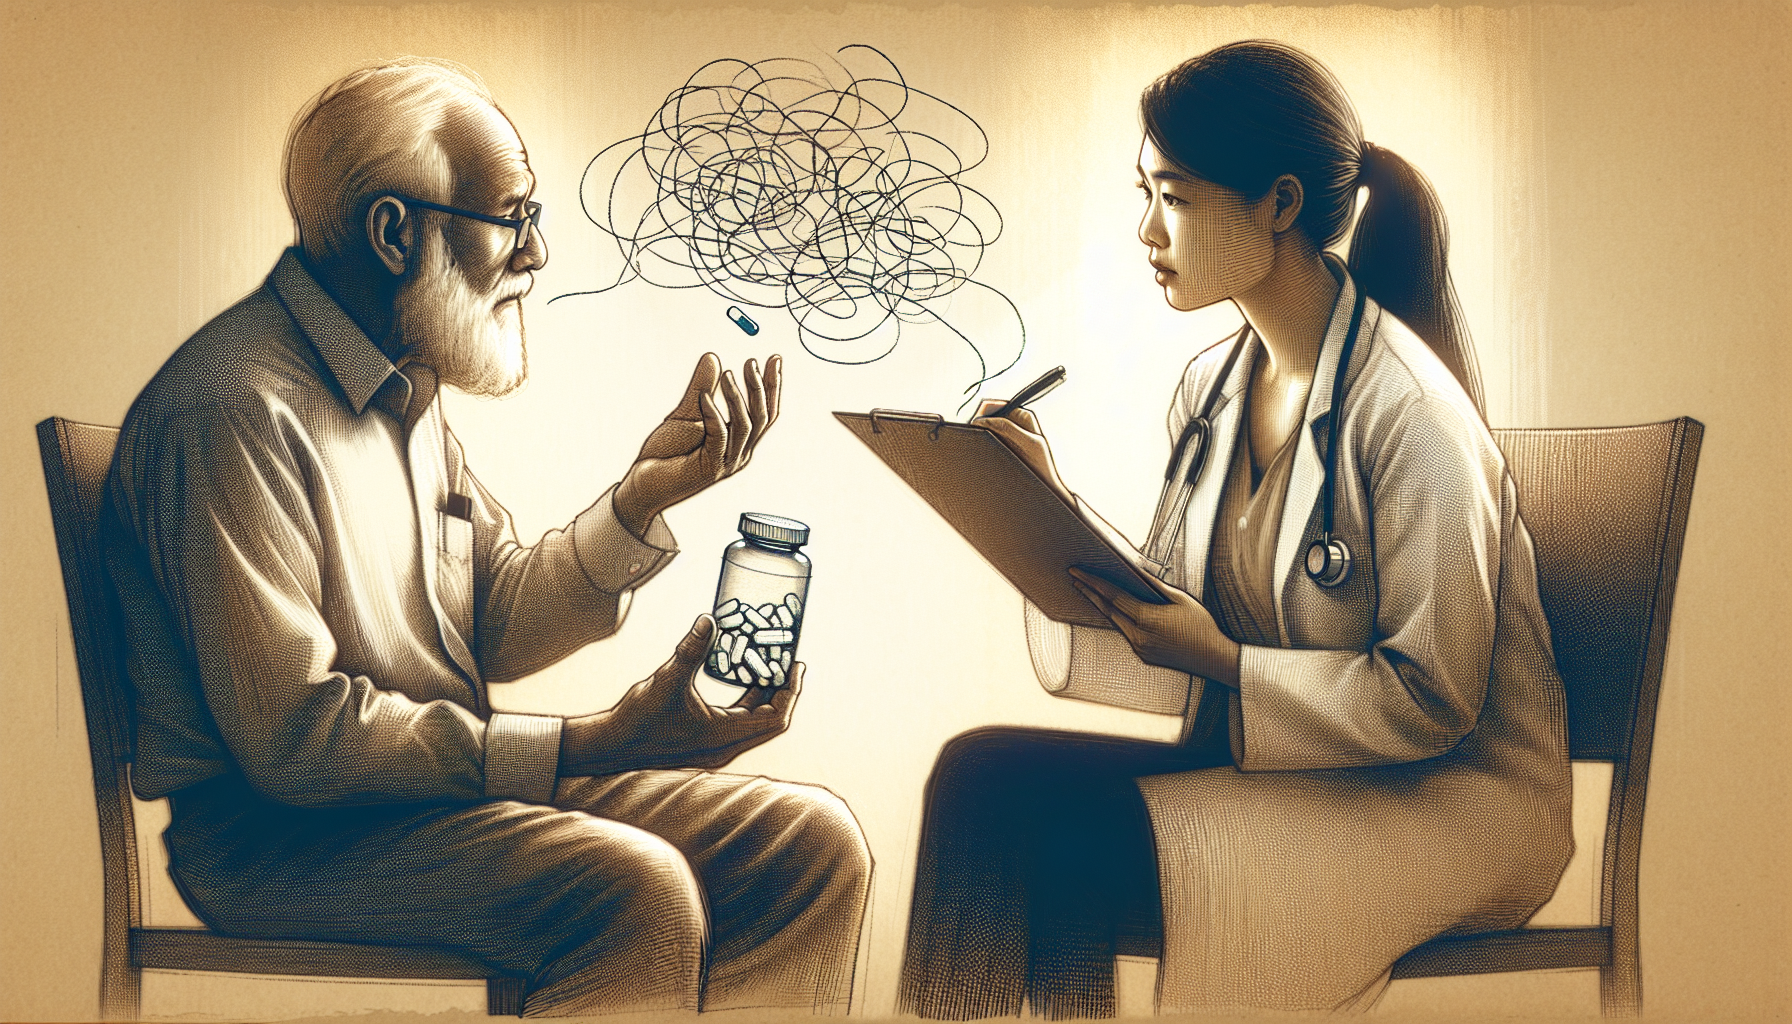 Illustration of a person discussing missed doses and side effects with a healthcare provider